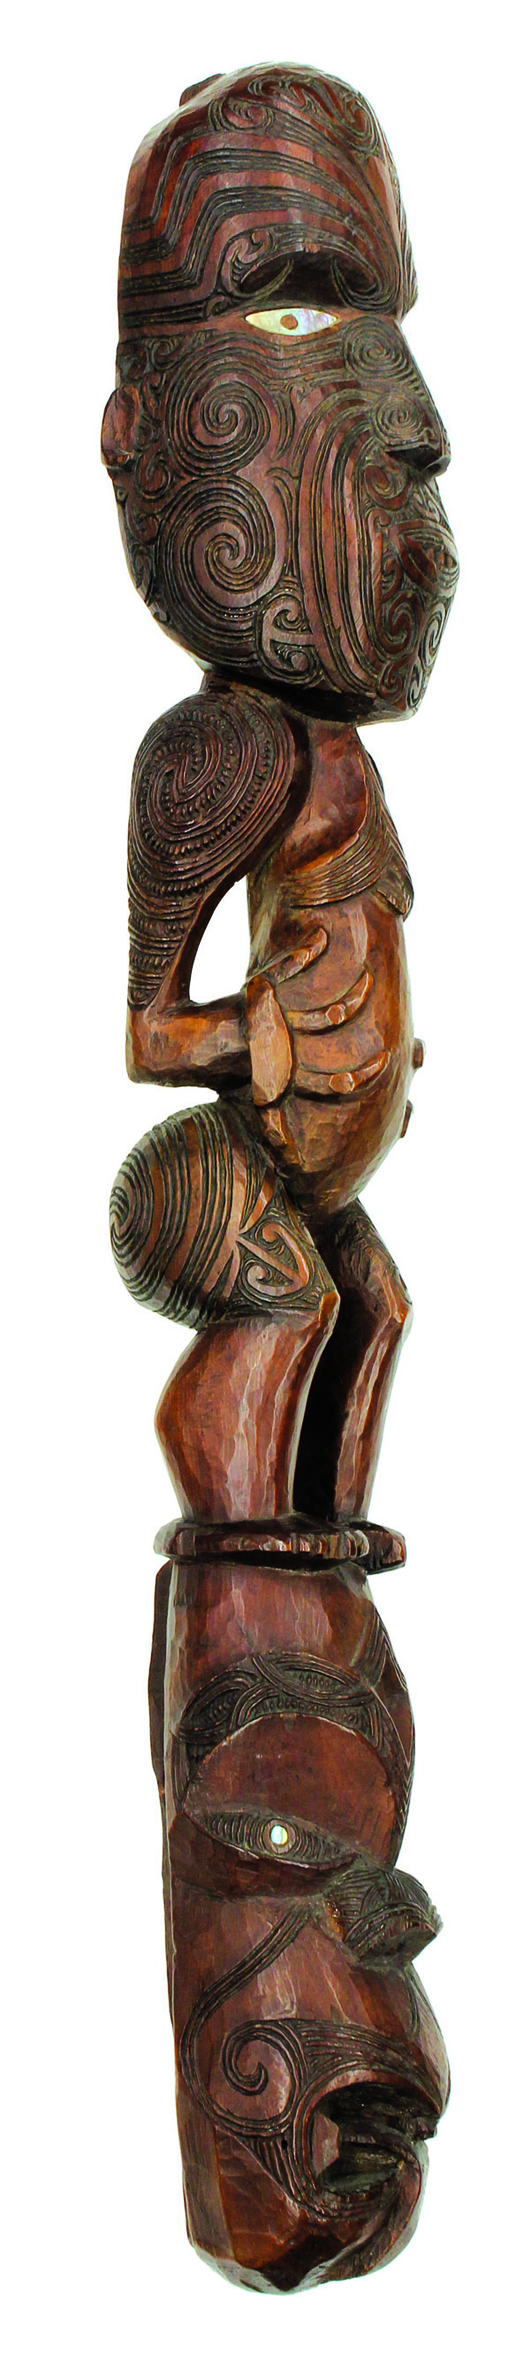 This significant 19th century Maori people, New Zealand, was expected to achieve $22,000 but sold impressively for almost double at $41,650. Clars Auction Gallery image.